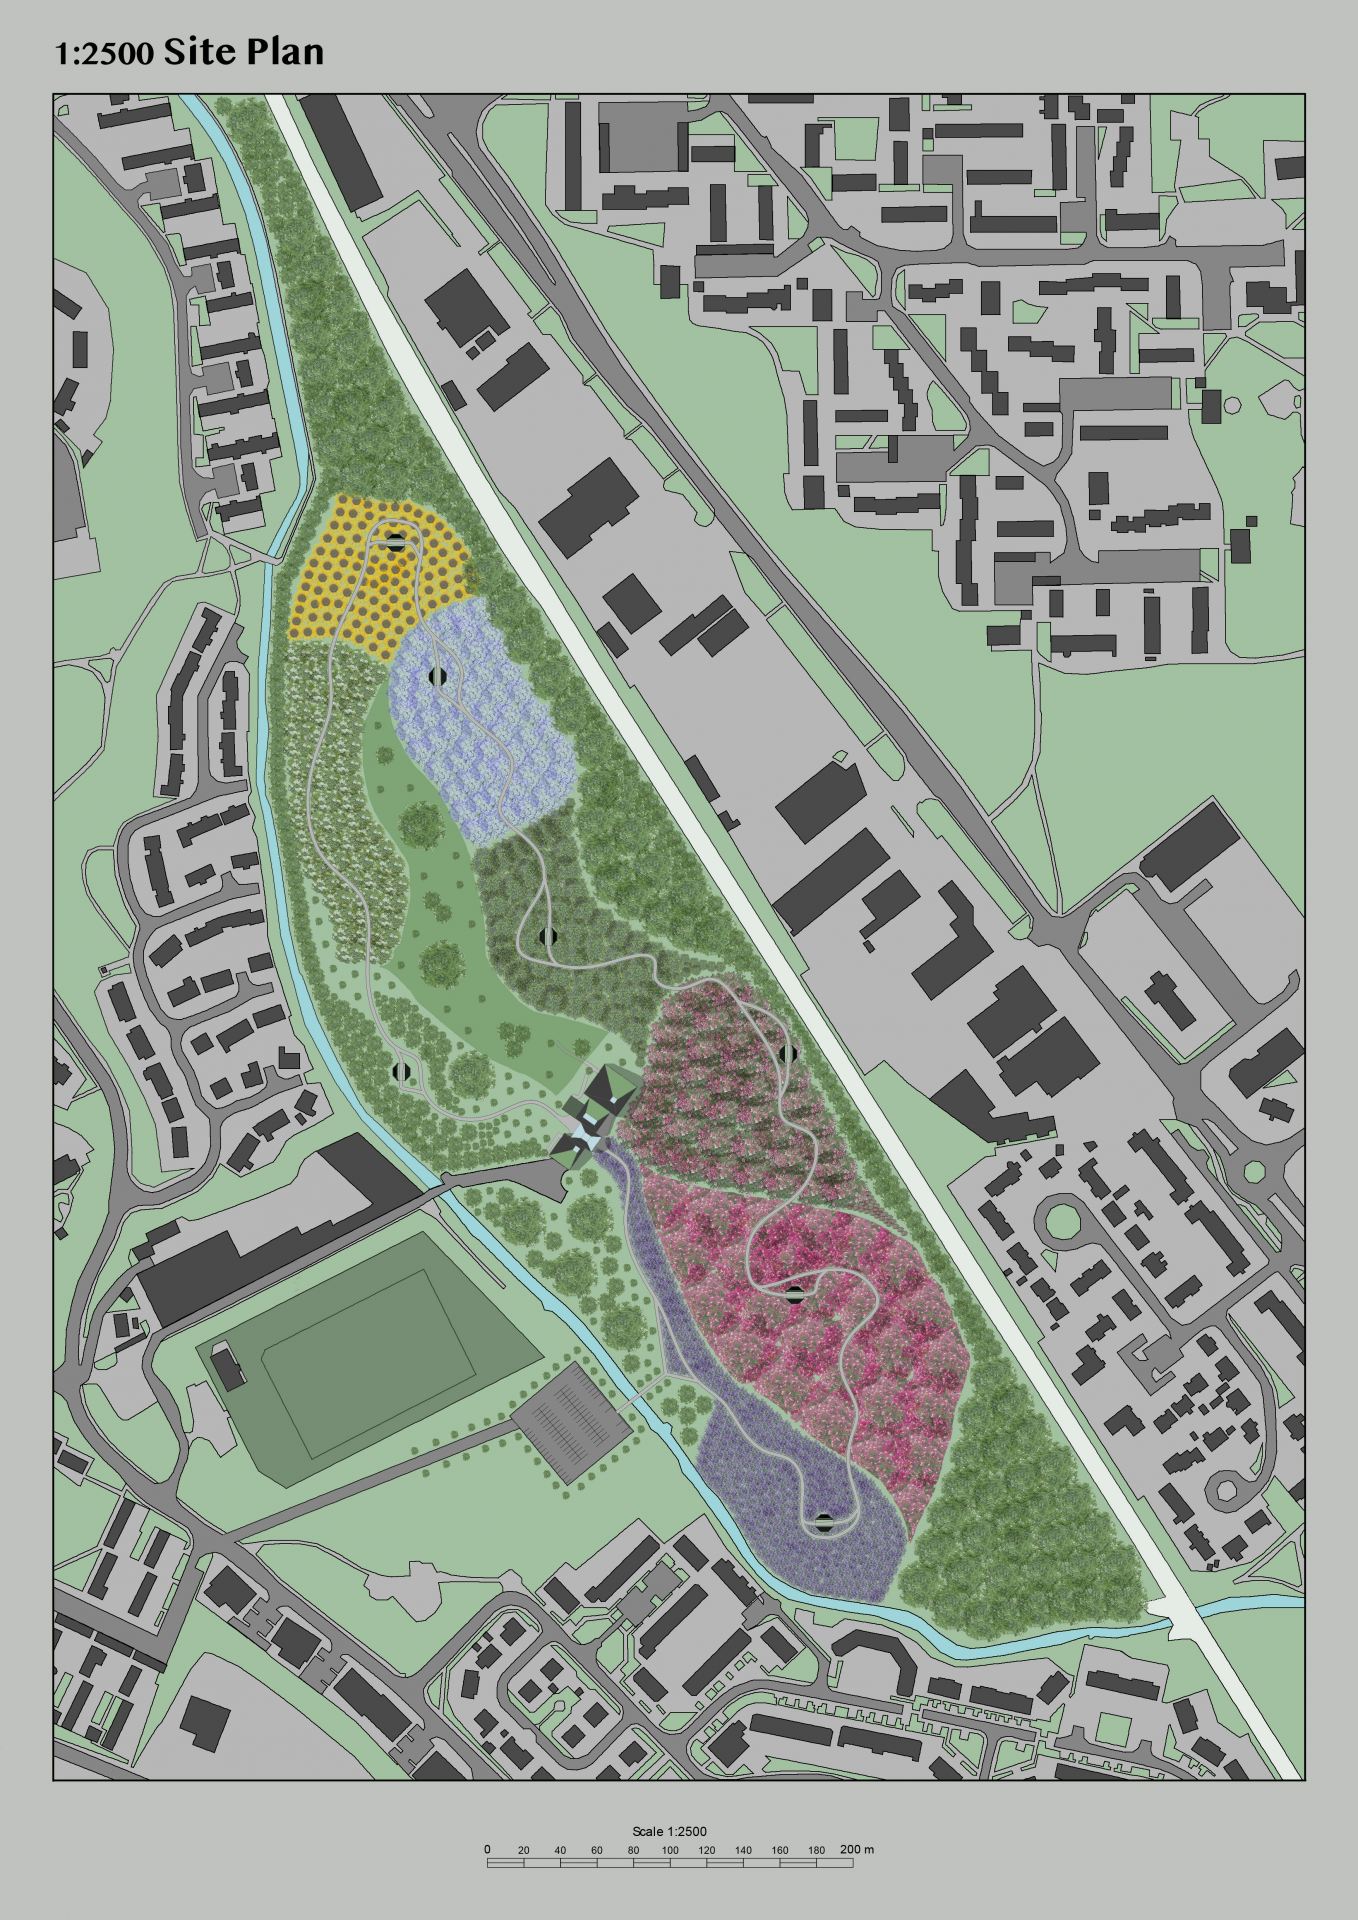 This is my site plan, showing the landscaping of the site, where the building will sit and how the nesting pods are connected with the building and the main path.